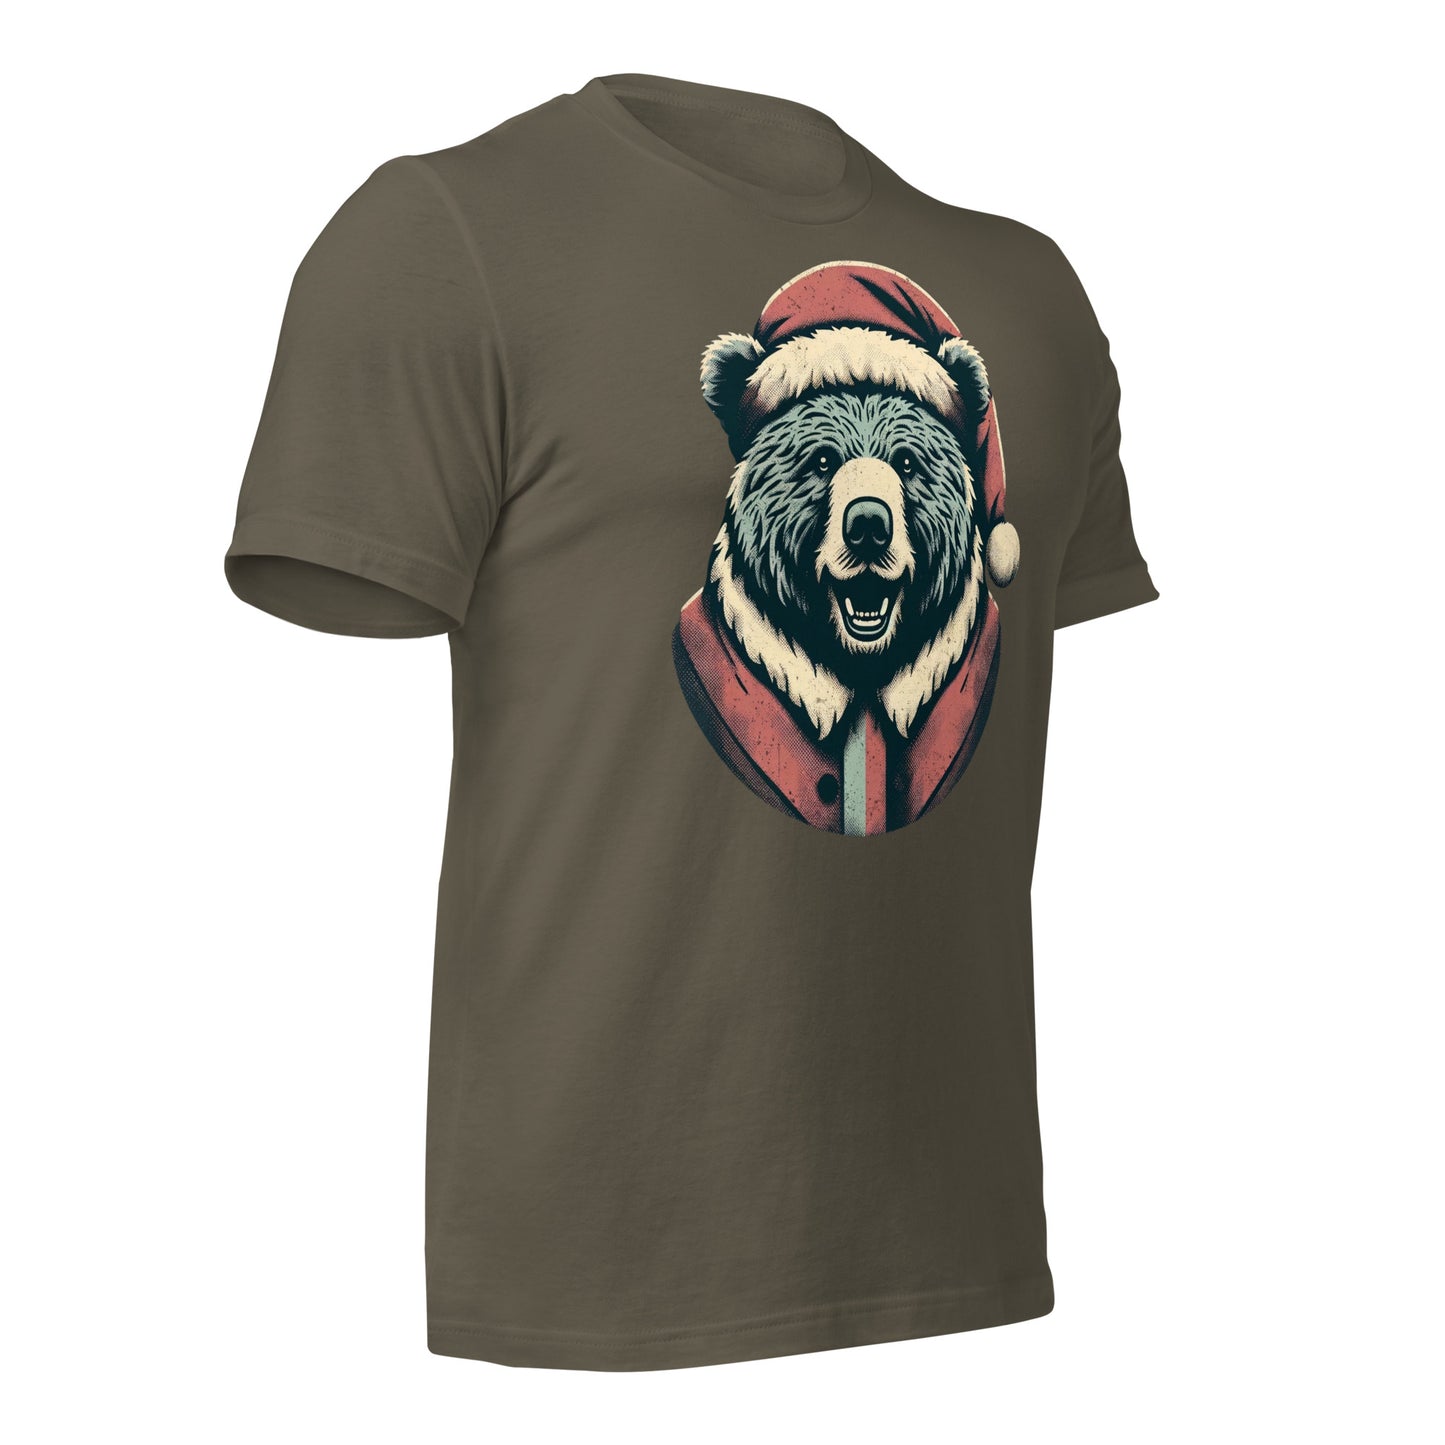 Bear-ly Merry: Rustic Christmas Retreat with Santa's Fuzziest Helpers Unisex t-shirt